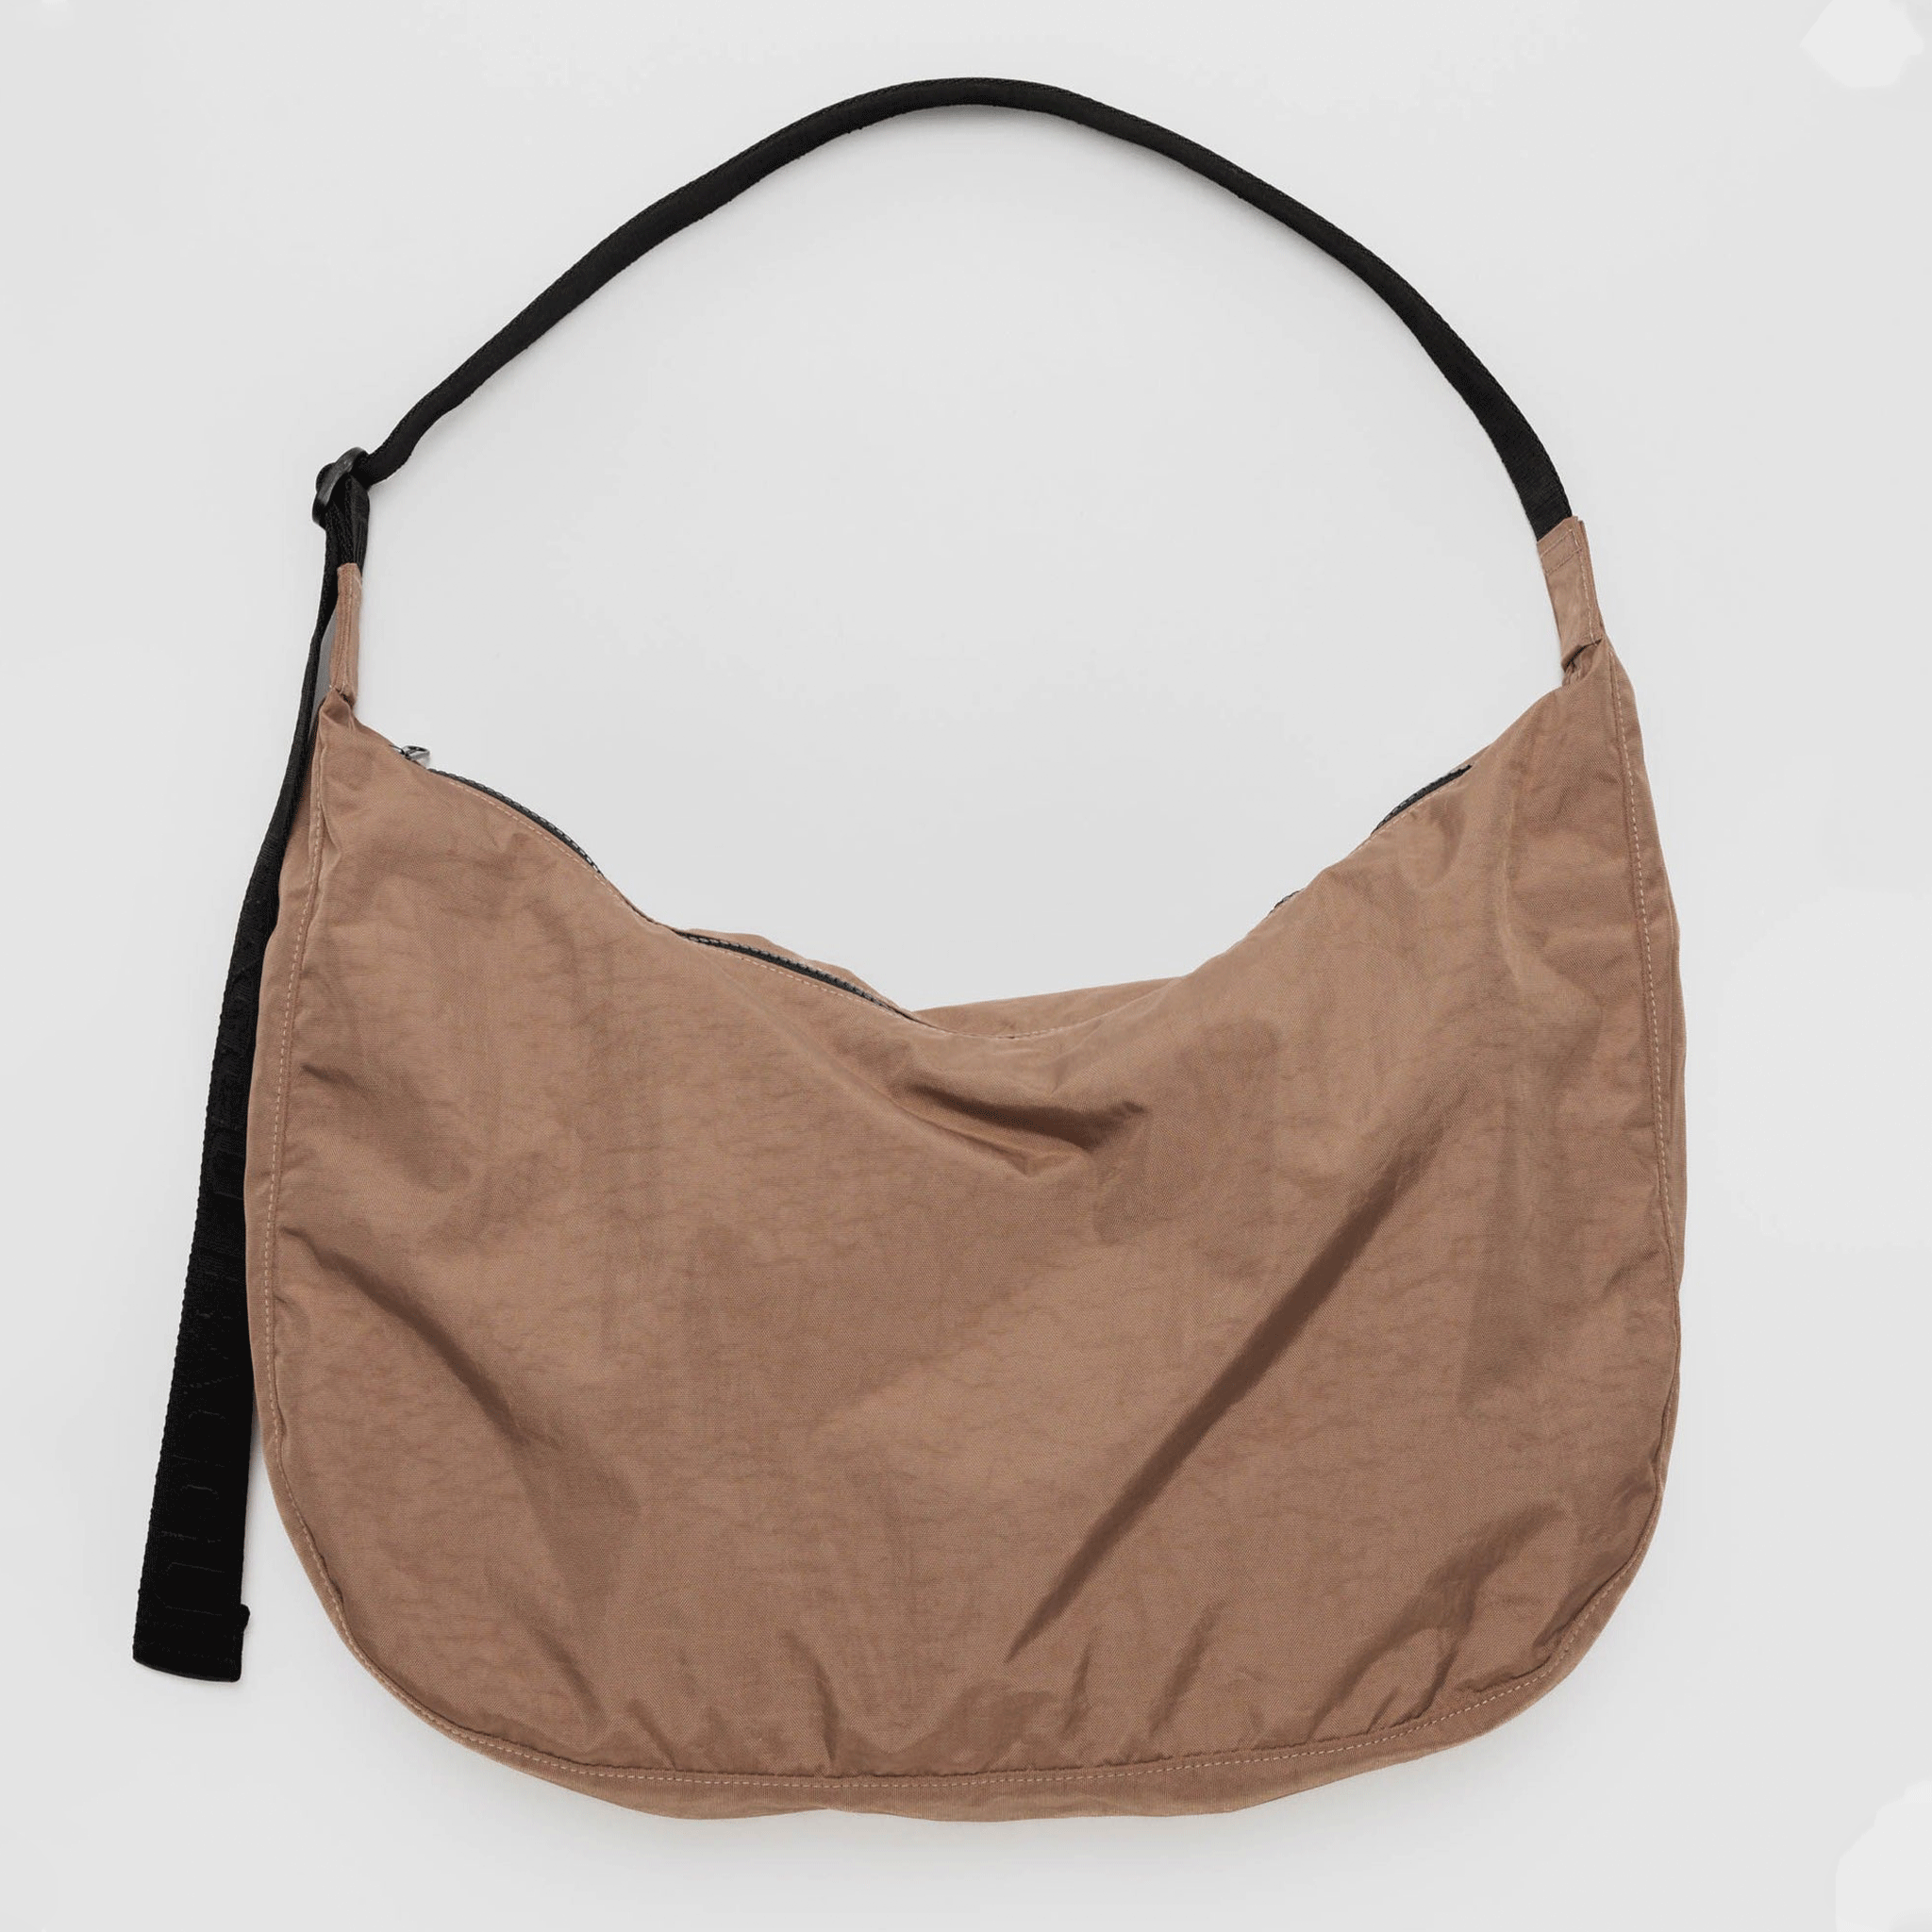 On a white background is a brown nylon crescent shaped tote bag with a black strap and zipper. 